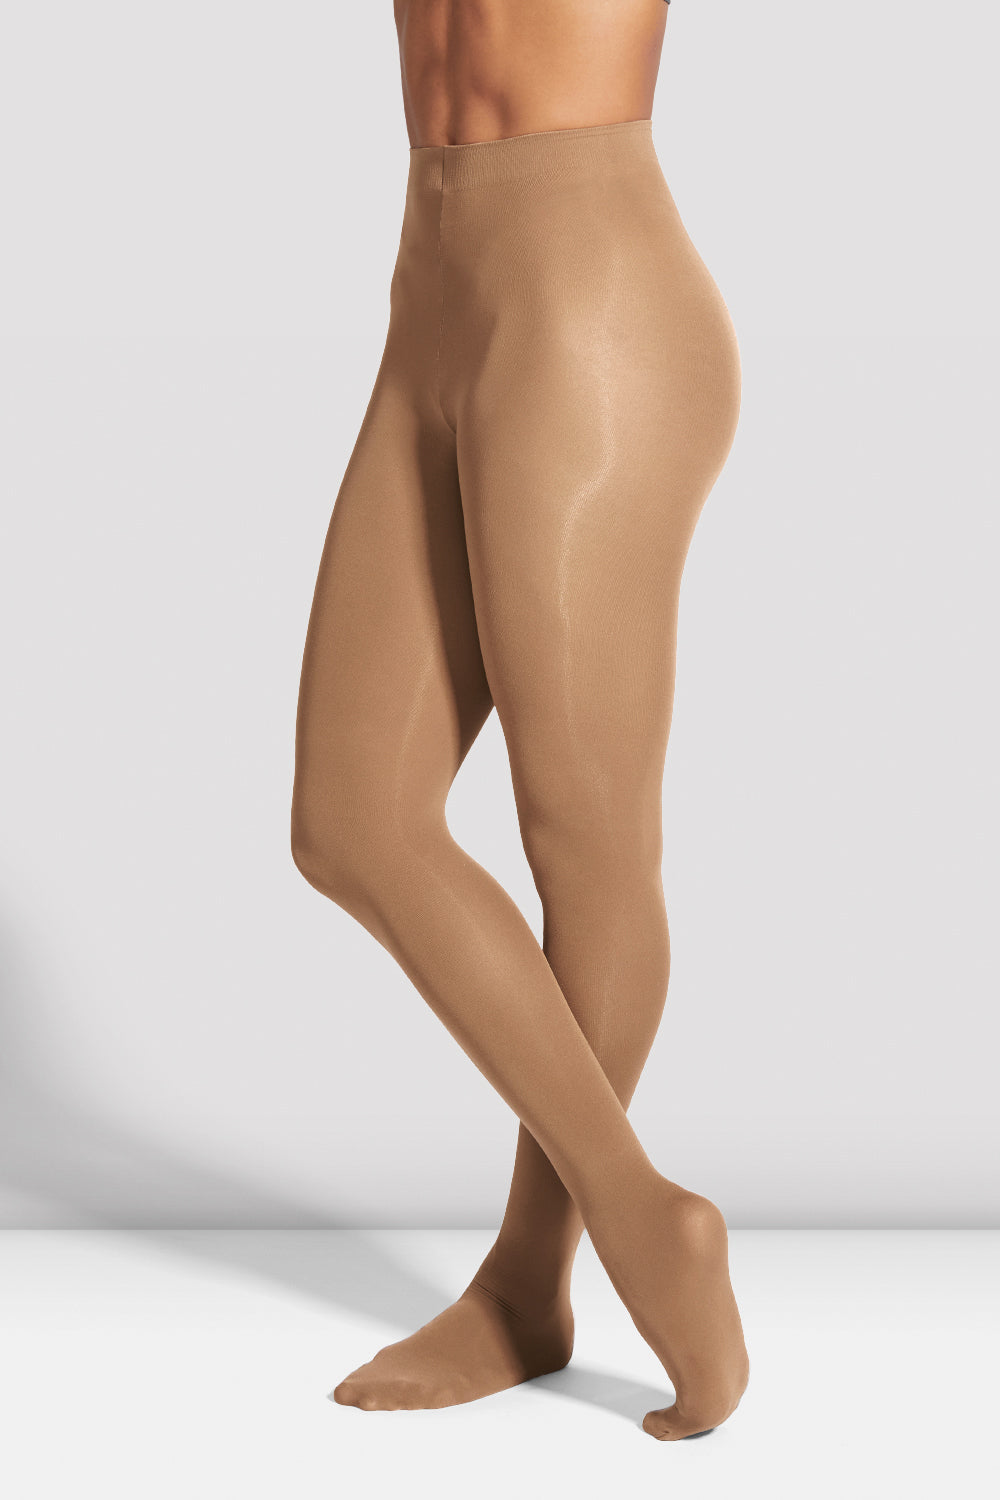 Girls Footed Tights, Tan – BLOCH Dance US